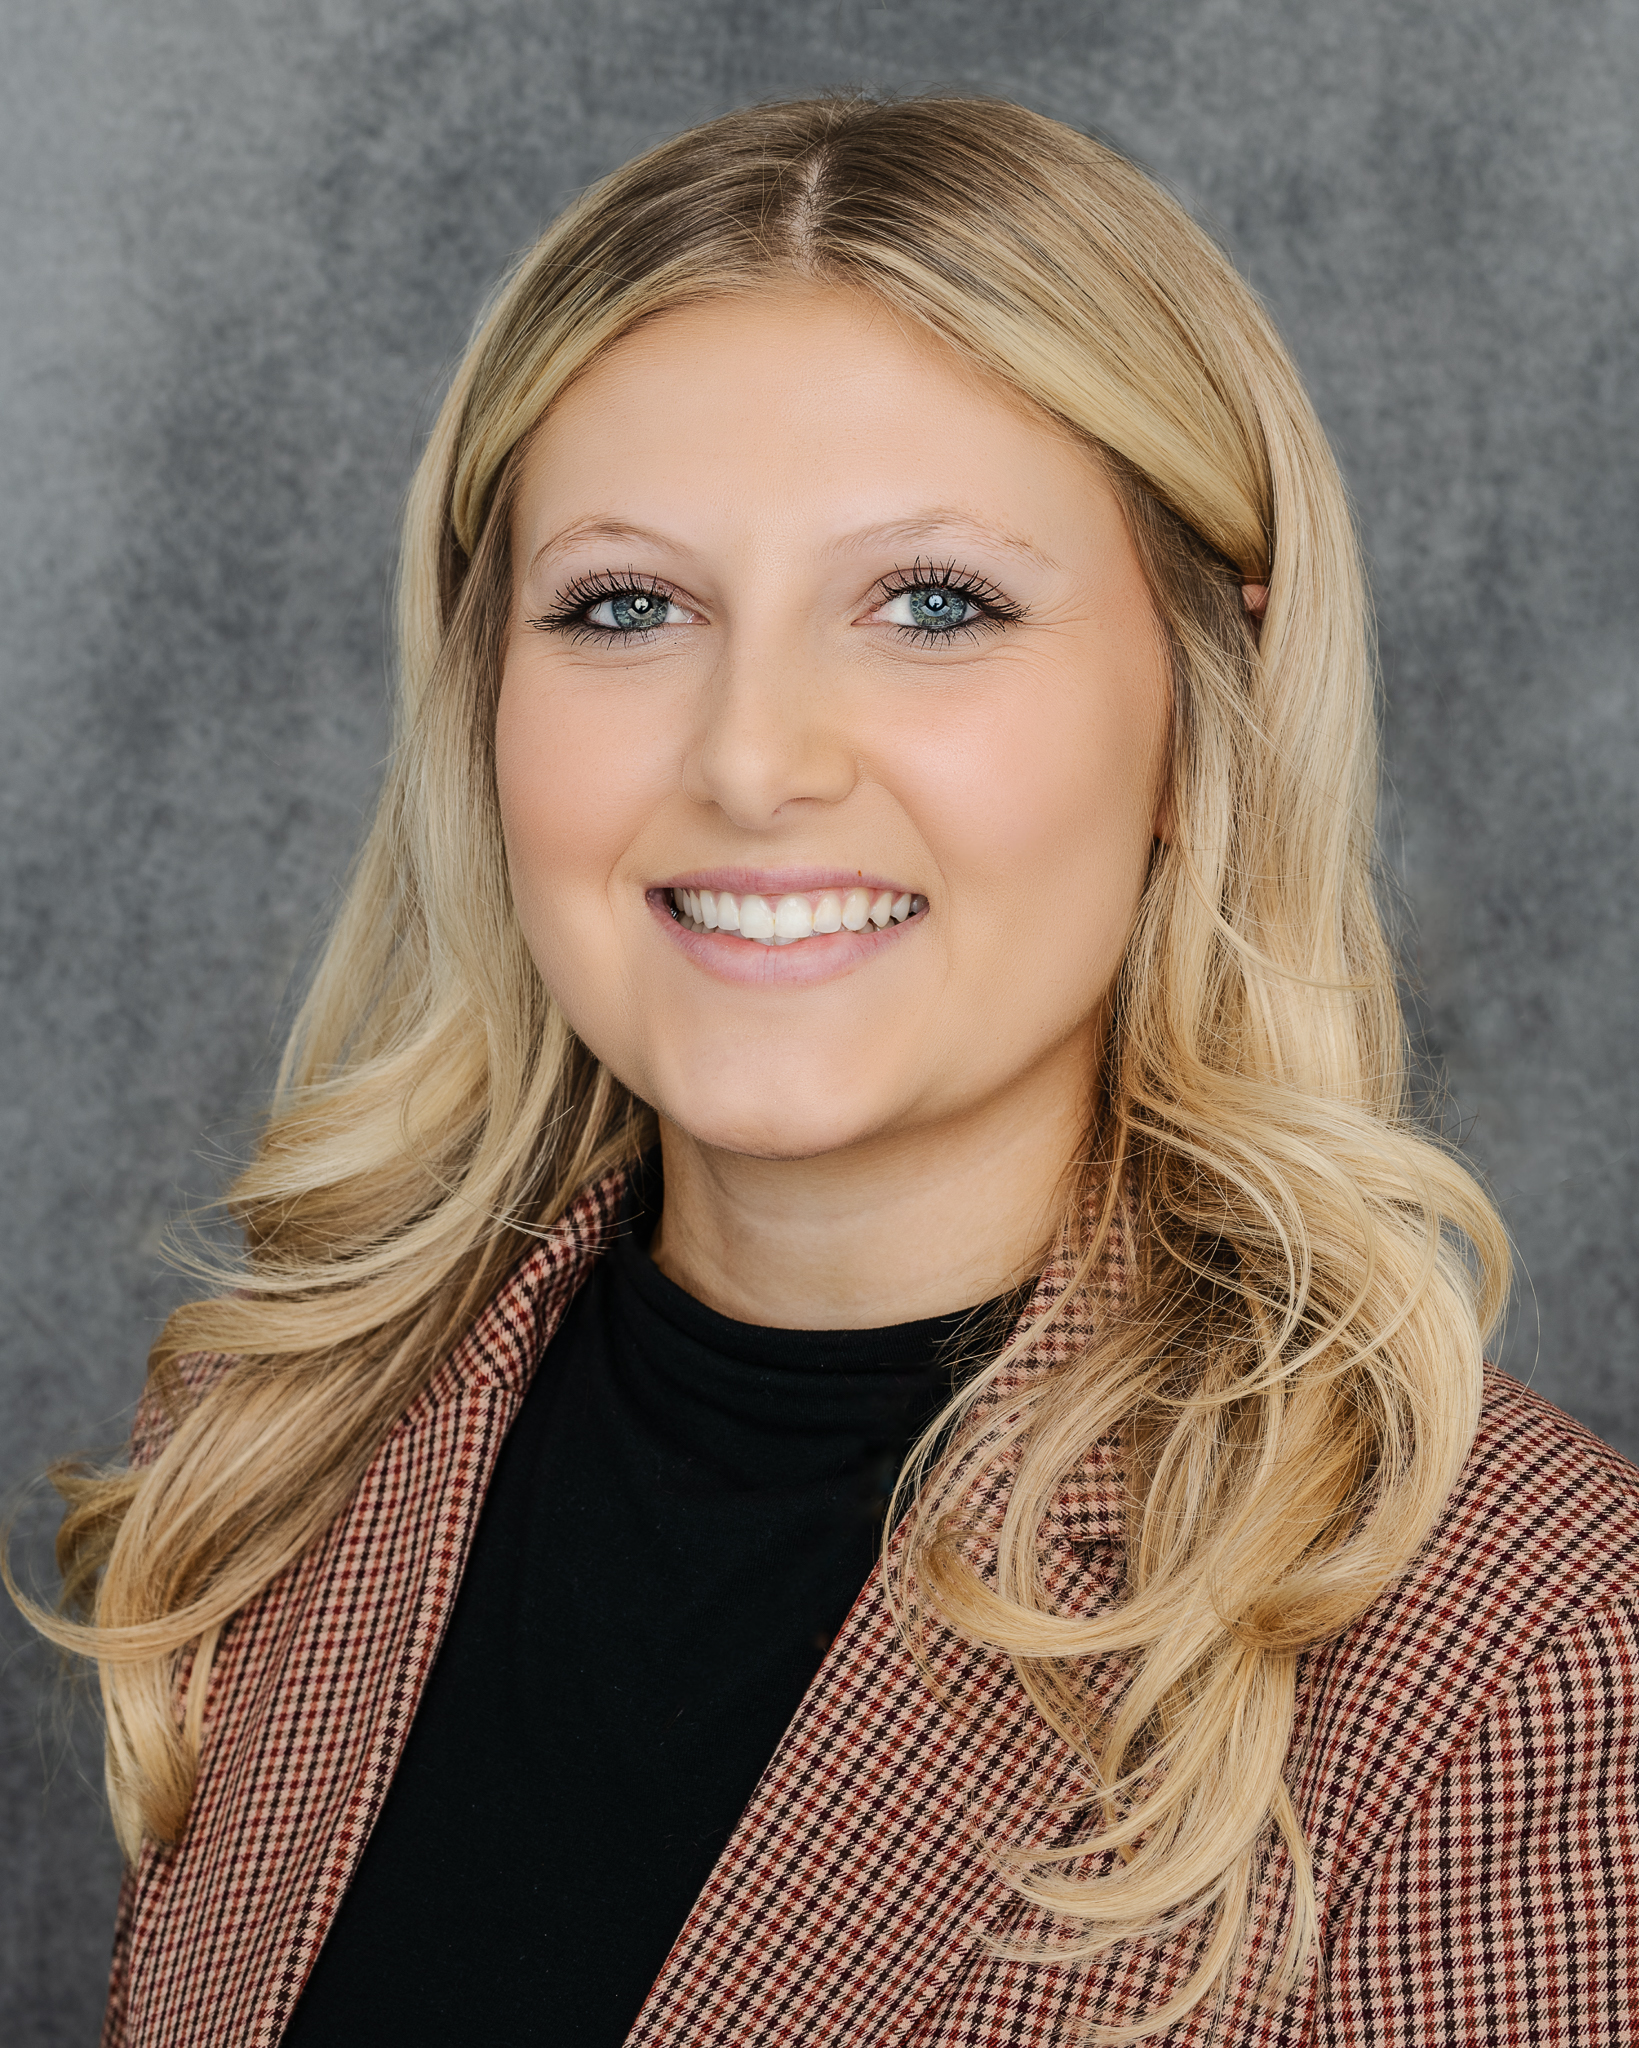 Professional headshot of IBM Watston Associate, against a clean backdrop, exuding confidence and approachability. Crisp attire and a friendly smile convey a polished and competent professional image, perfect for LinkedIn profiles and business websites.